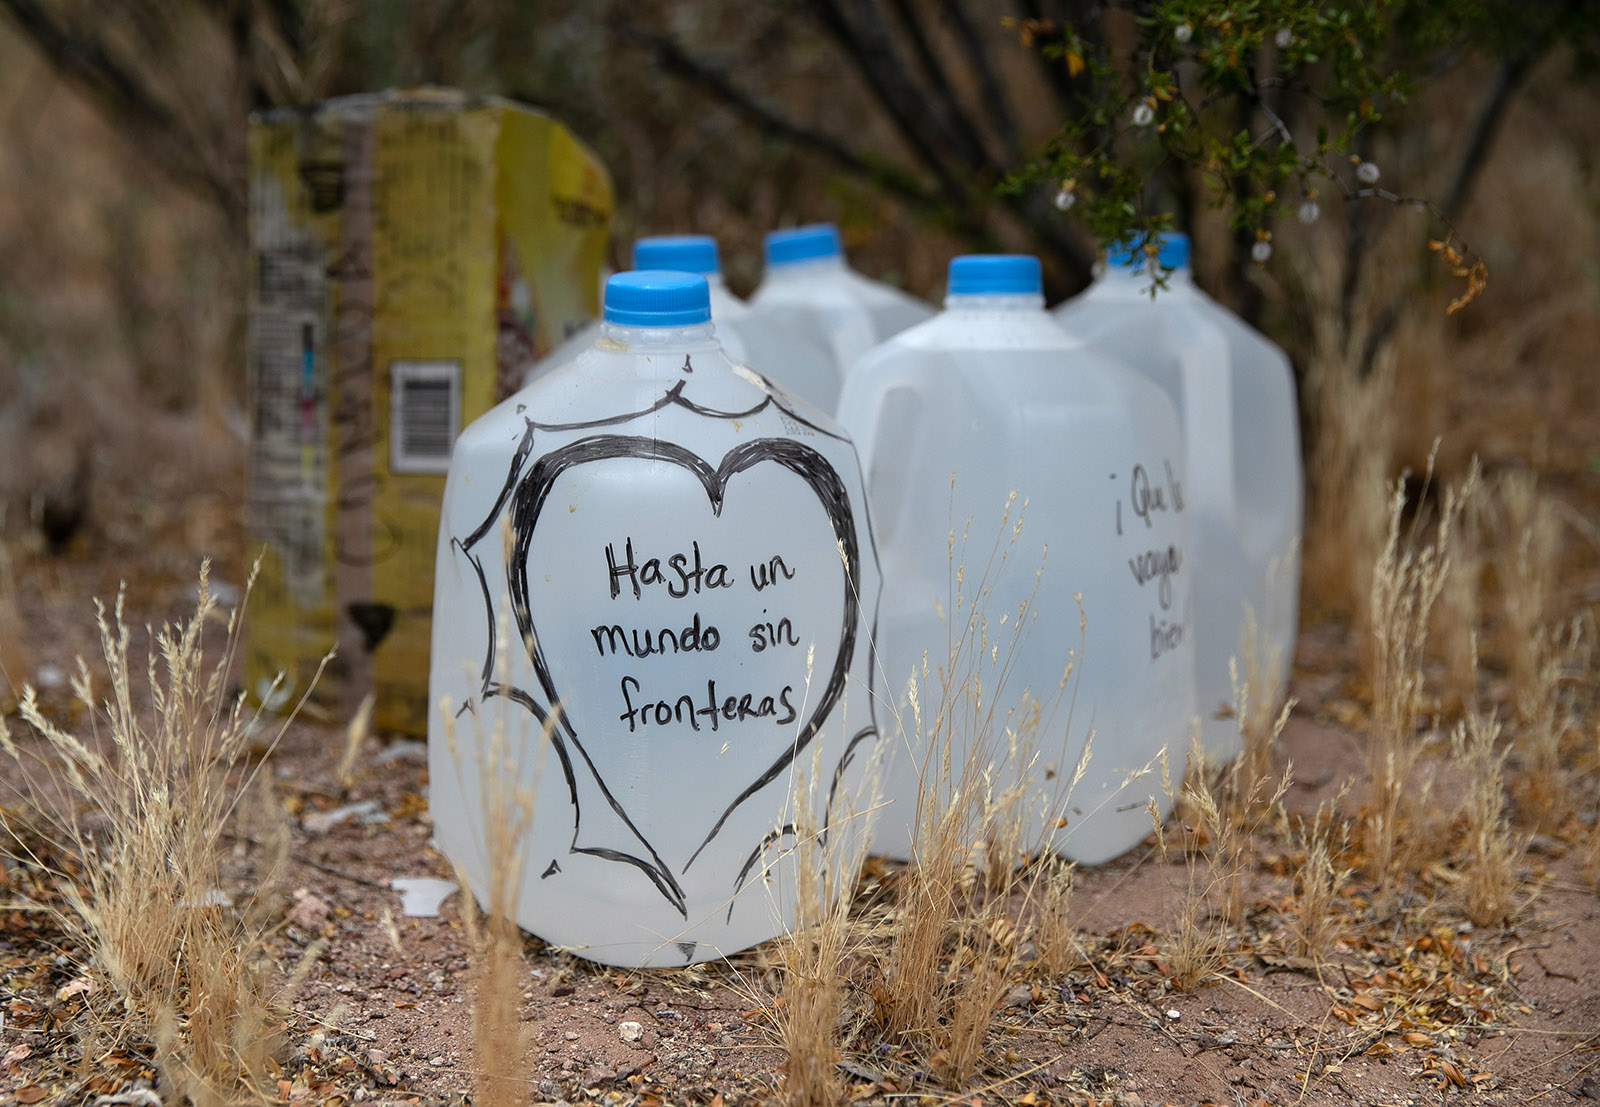 Jugs of water left along migrant trails by the humanitarian aid group No More Deaths, for which Scott Warren volunteers, near Ajo, Arizona, May 10, 2019